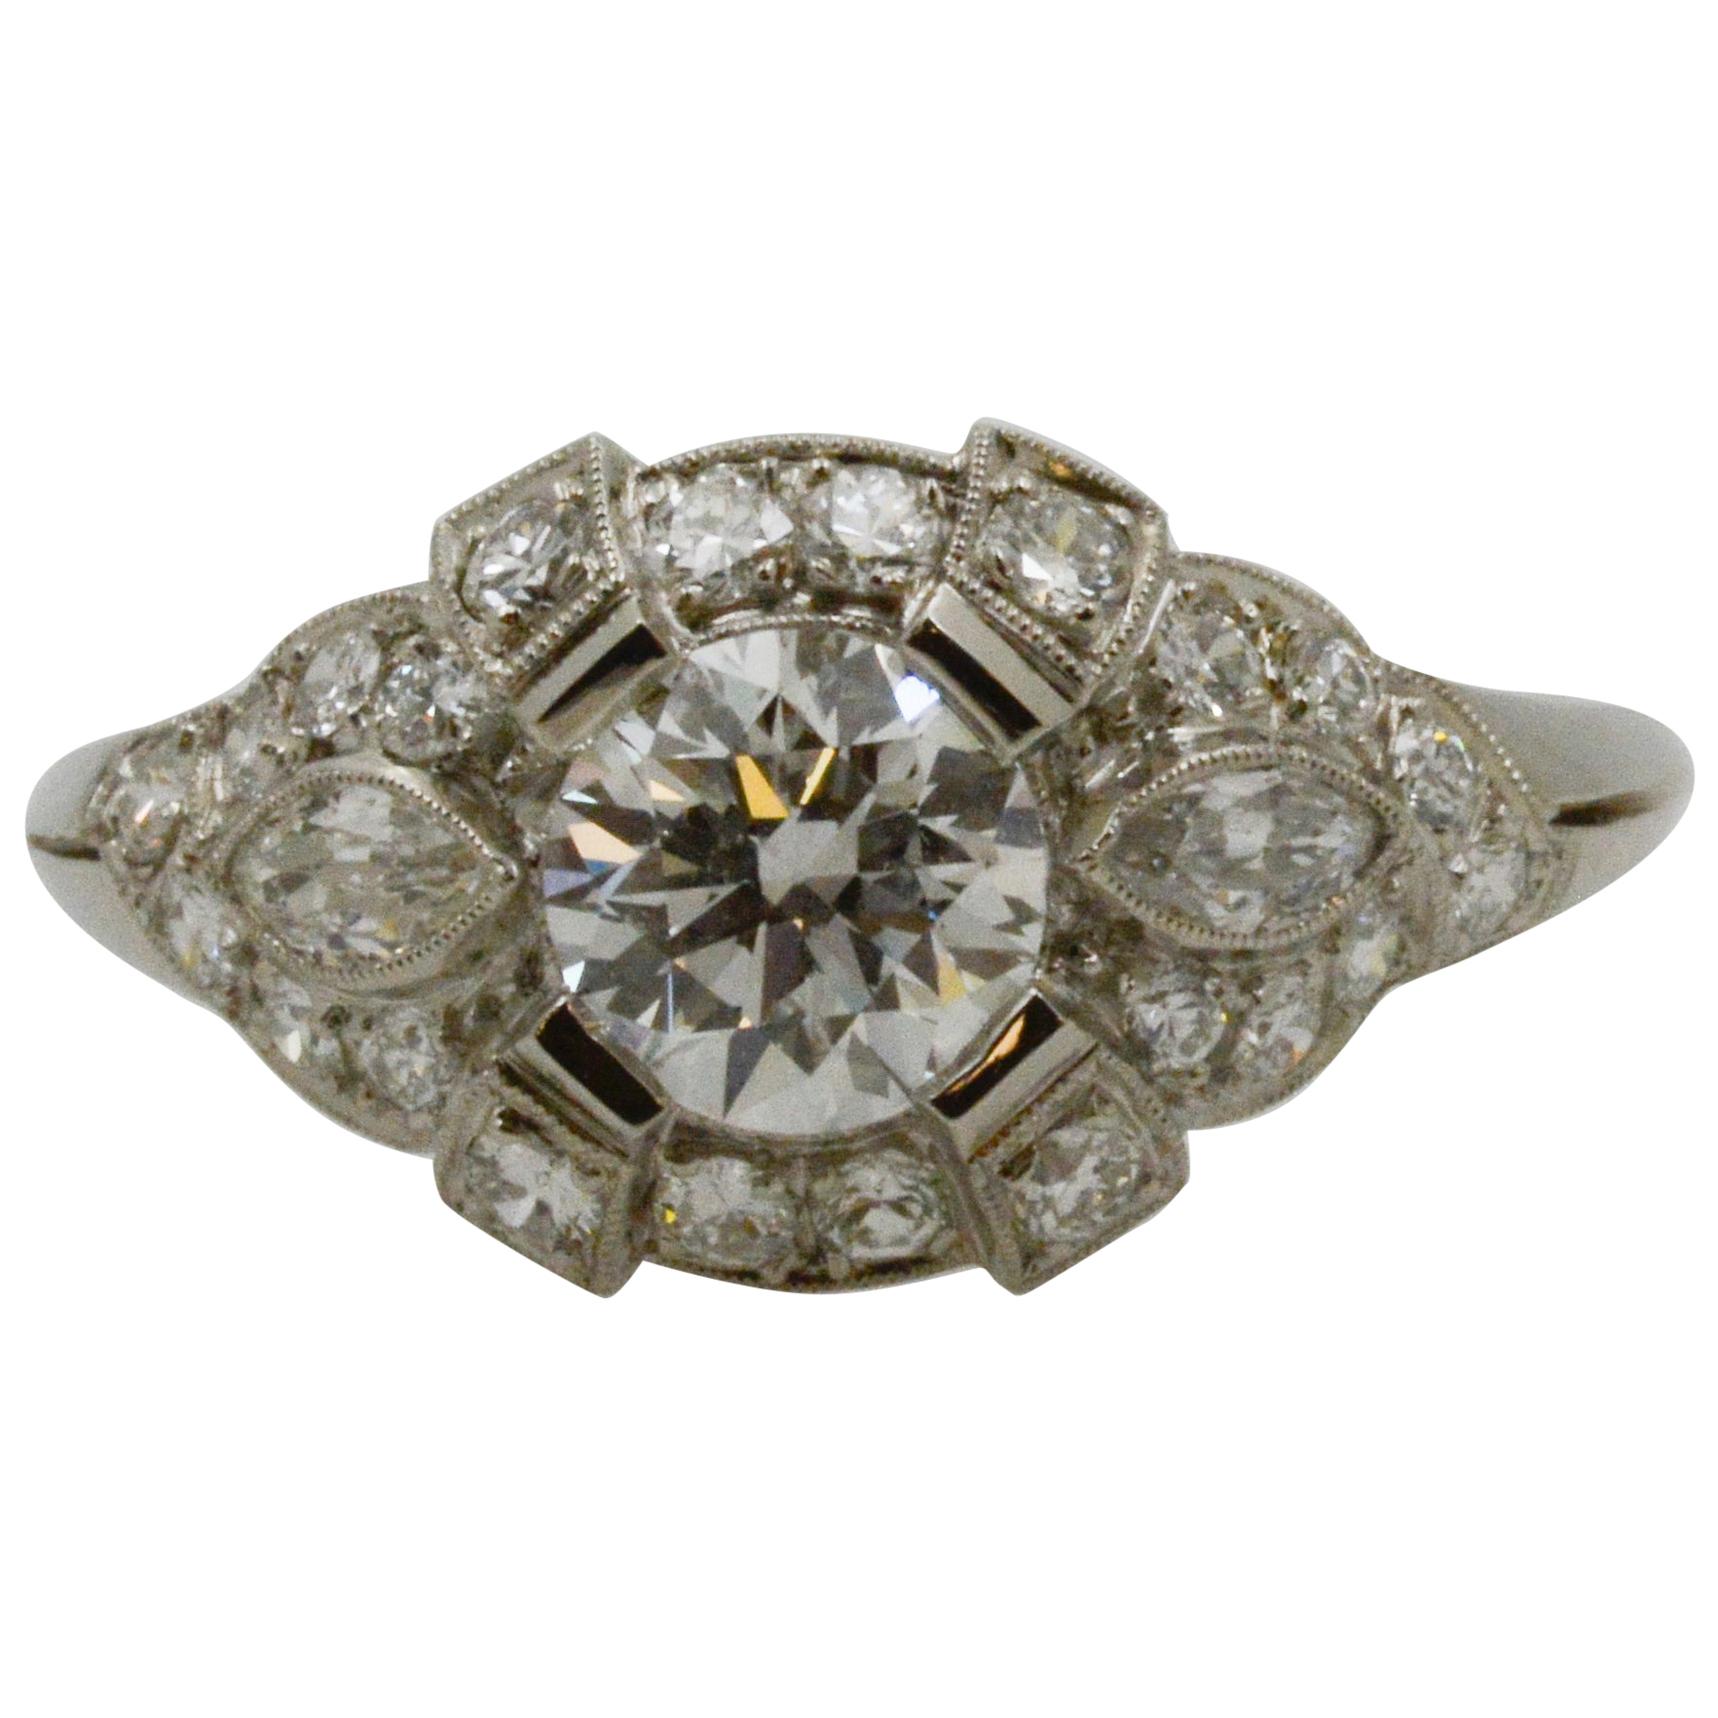 This platinum Art Deco Style GIA certified ring features round brilliant cut diamonds weighing an approximate 0.90 combined carats with E coloring, and SI2 clarity, and 22 European cut diamonds weighing an approximate 0.25 combined carats, and two